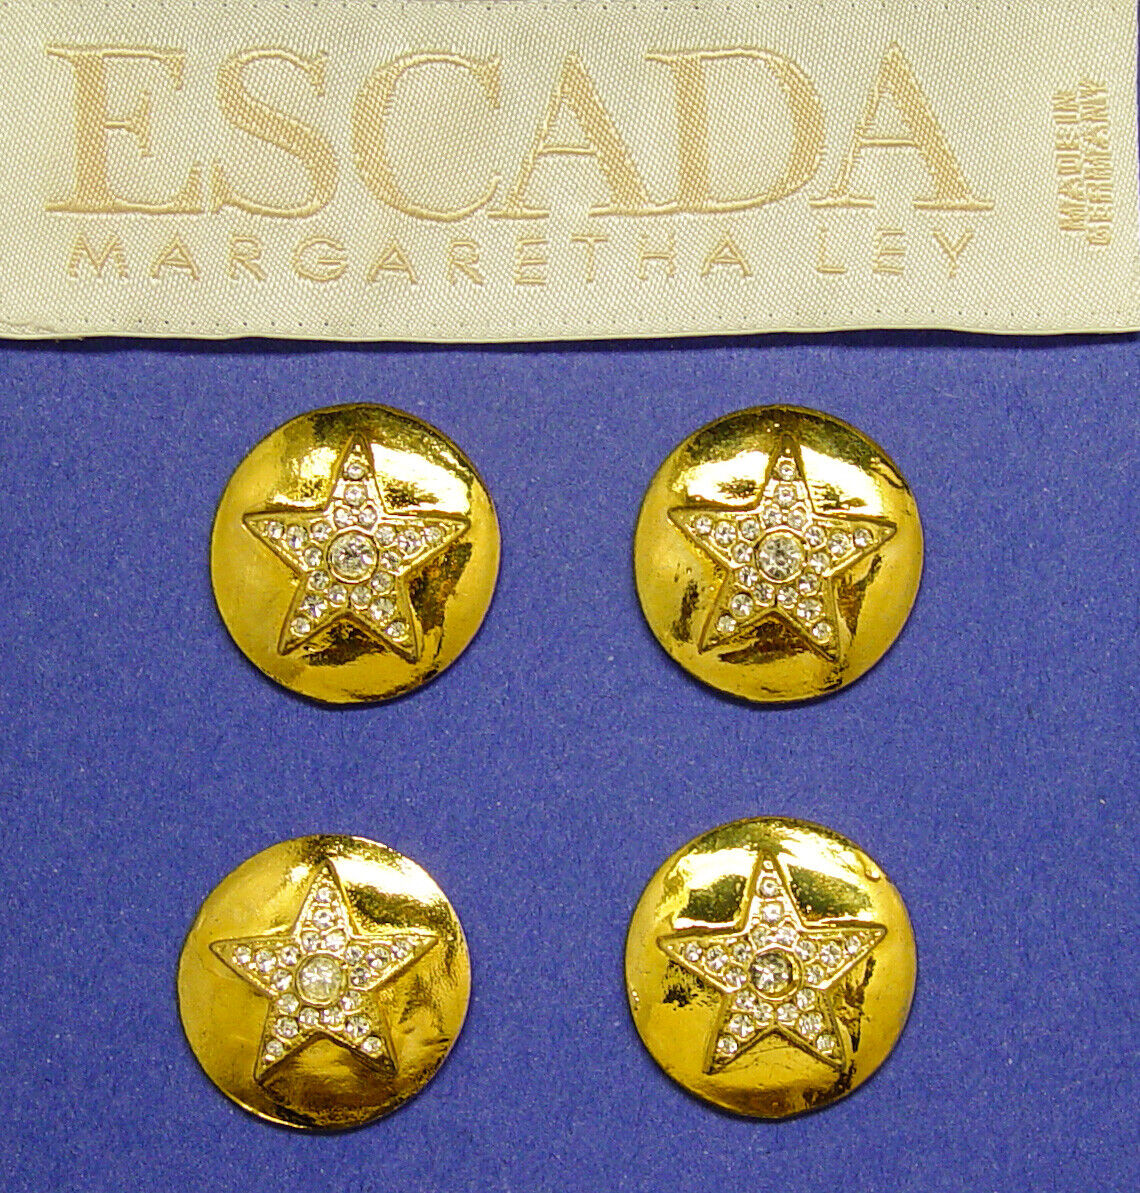  4 ESCADA BIG RHINESTONE STAR GOLD TONE METAL REPLACEMENT BUTTONS GOOD USED COND